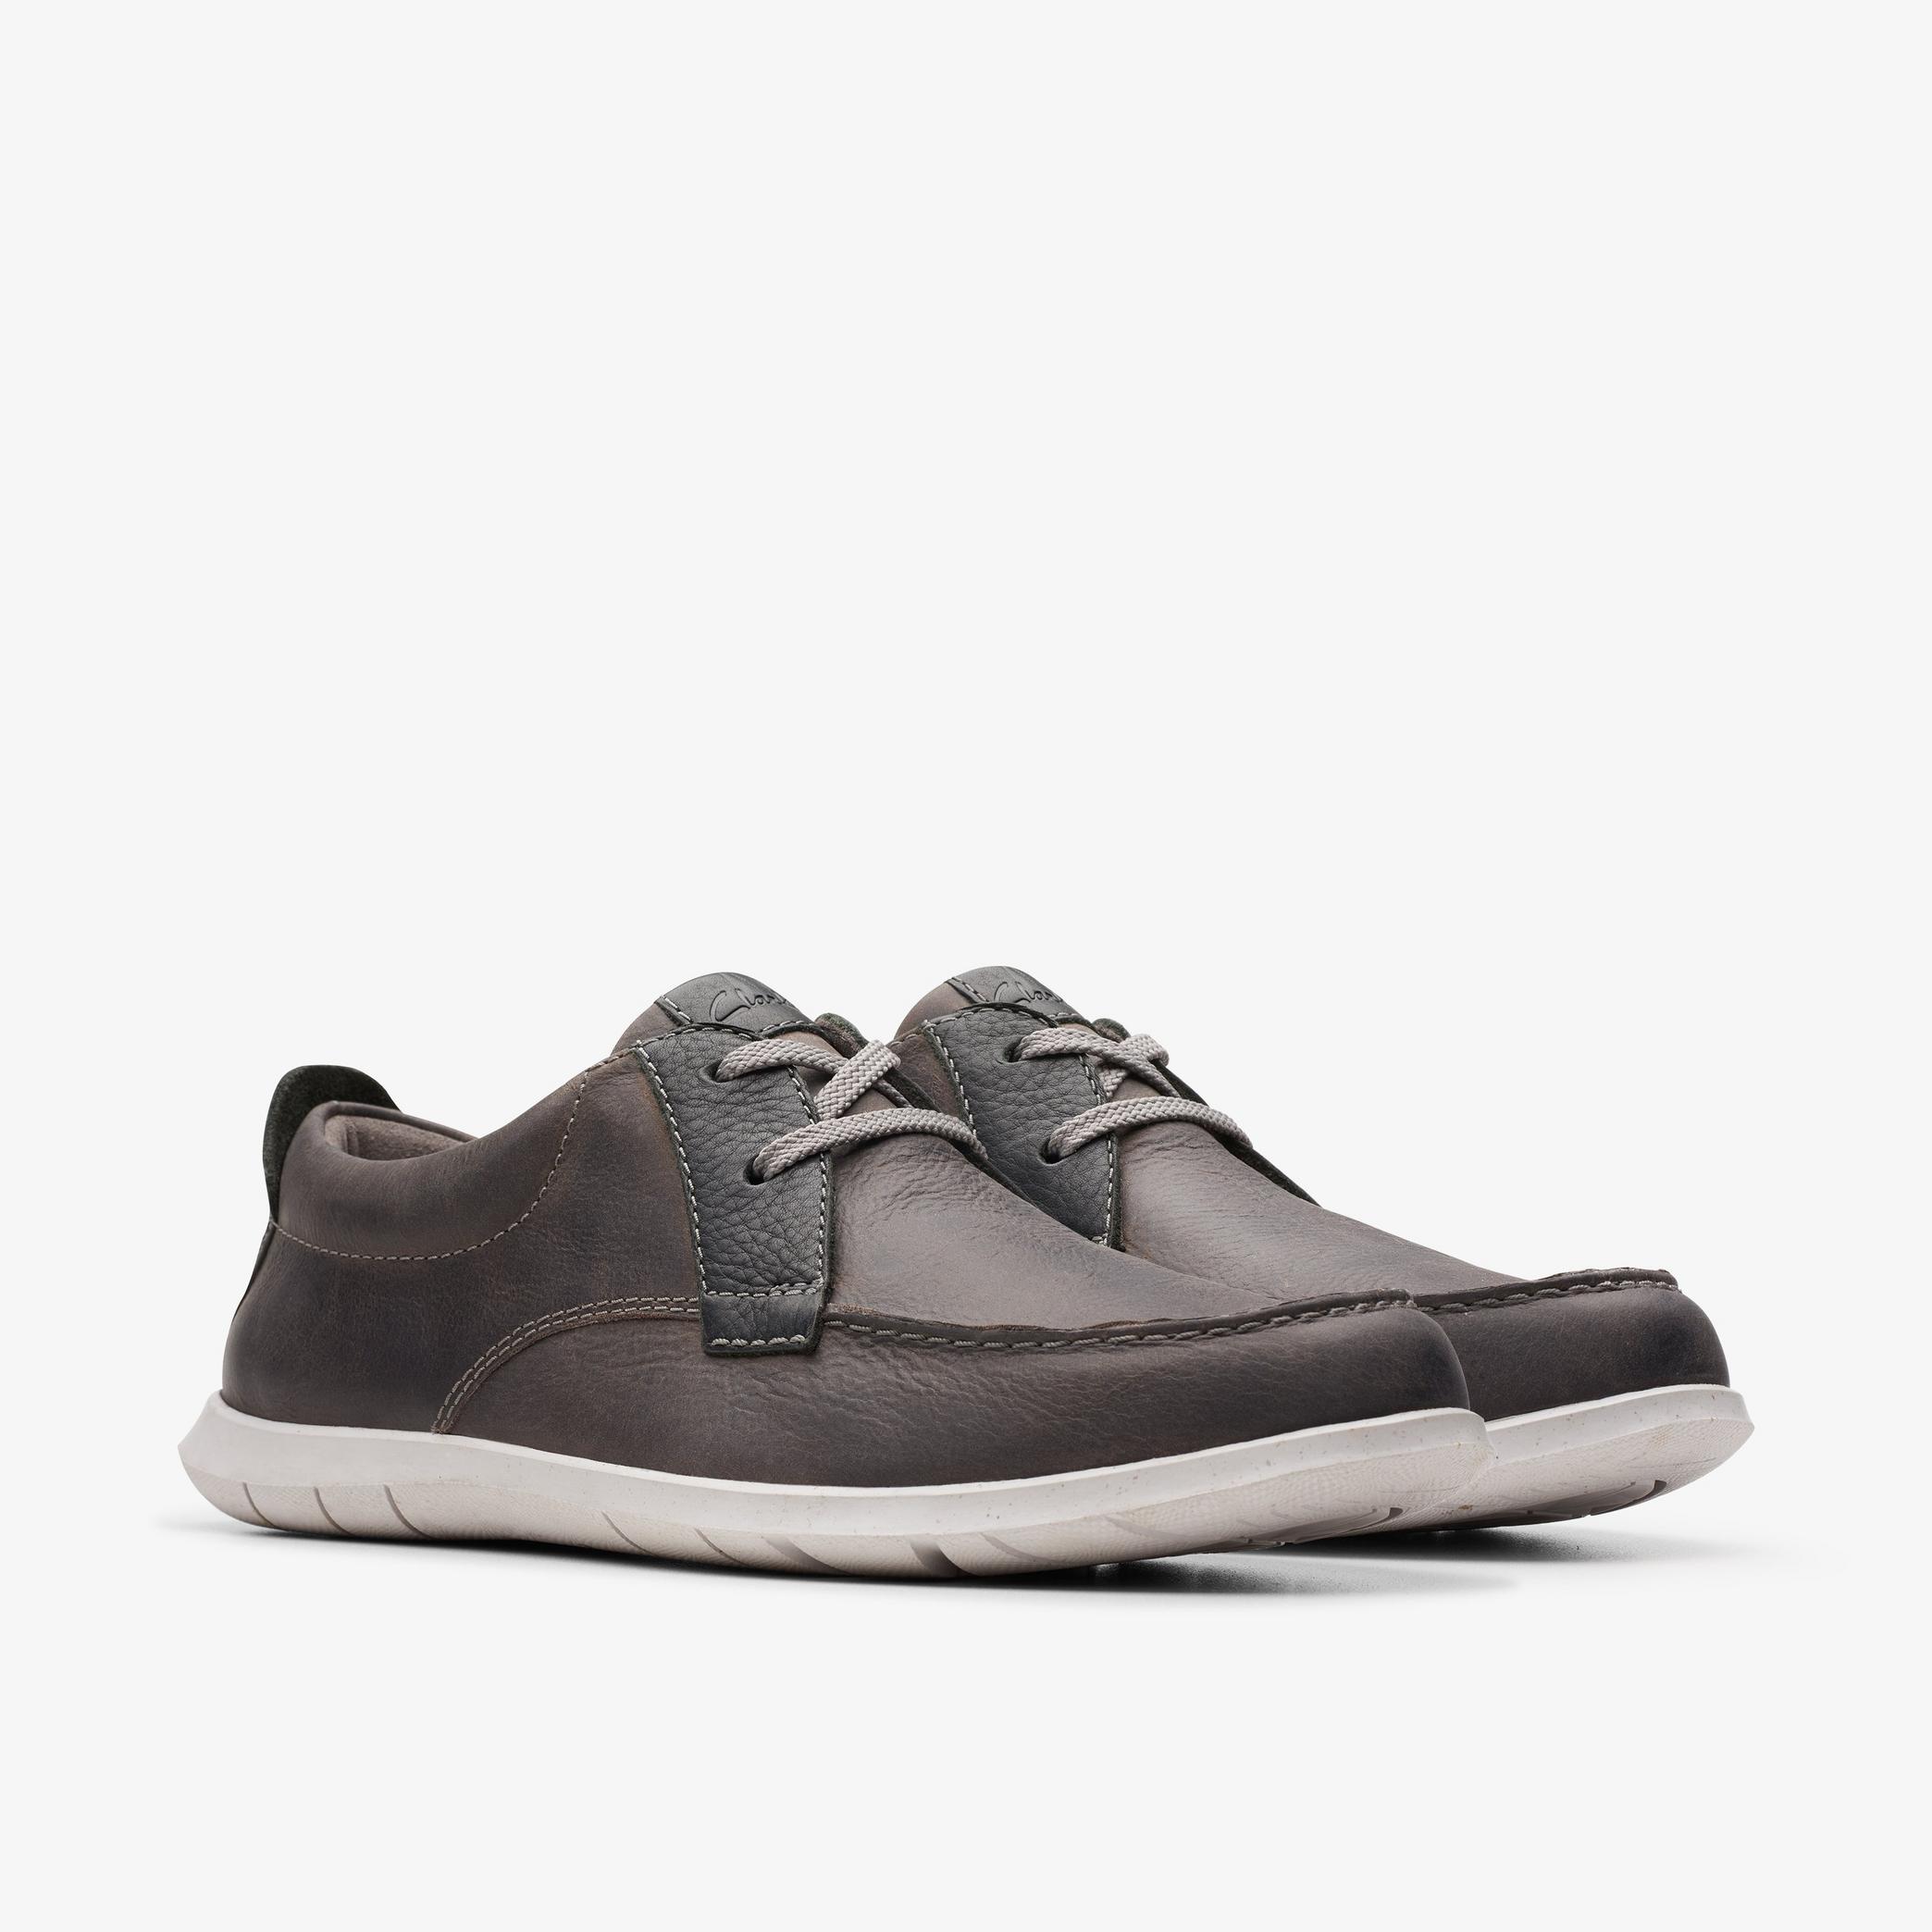 Flexway Lace Light Grey Leather Boat Shoes, view 4 of 6